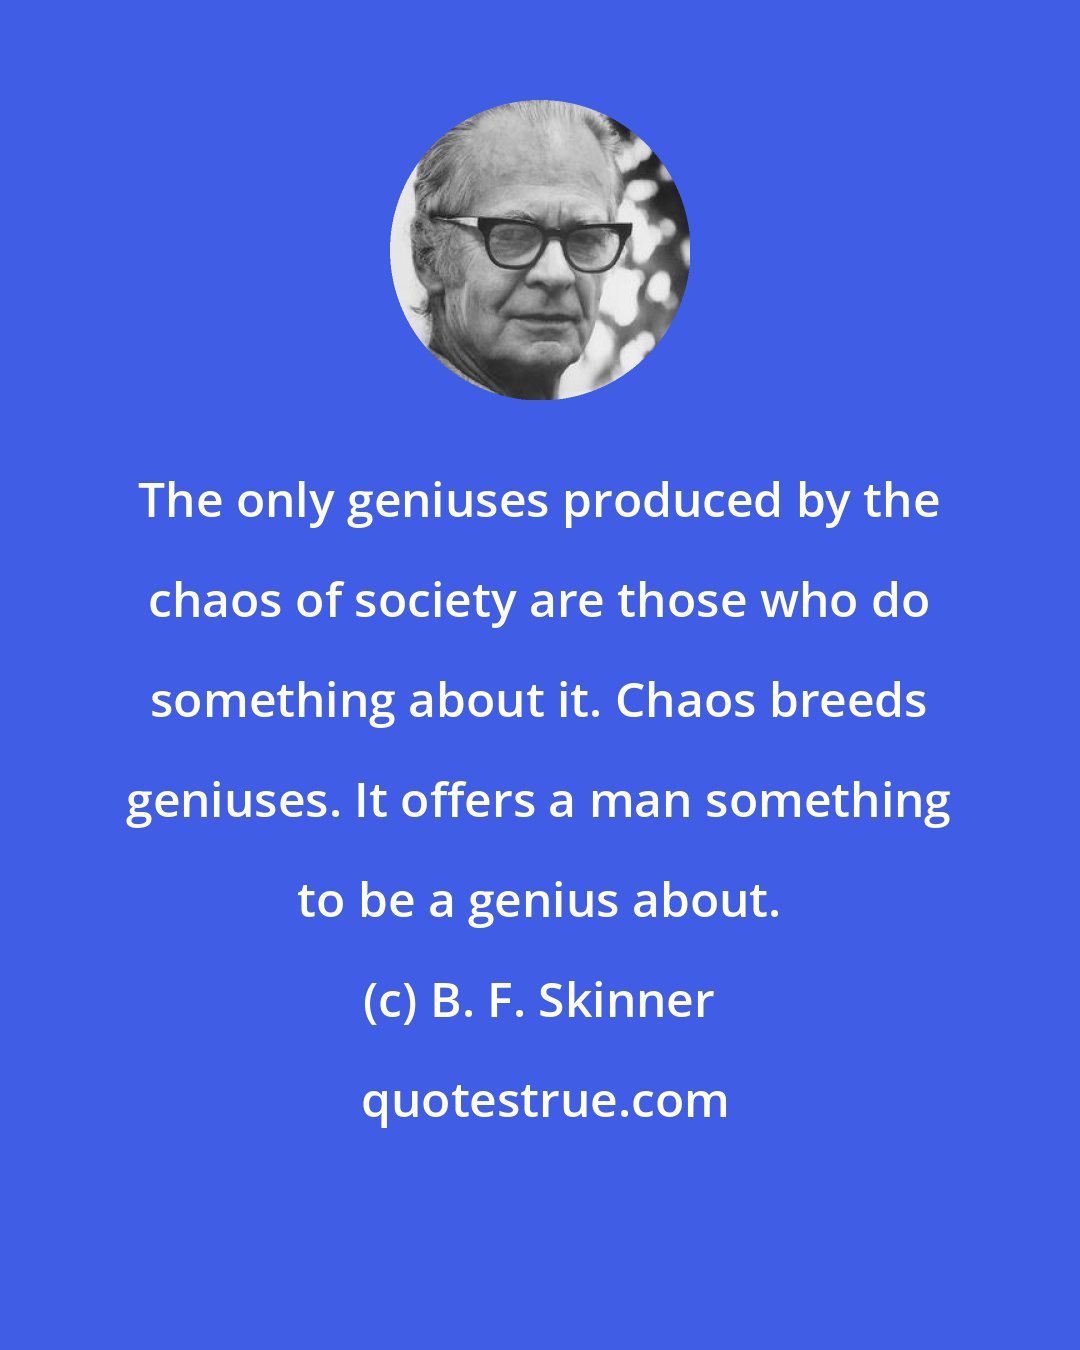 B. F. Skinner: The only geniuses produced by the chaos of society are those who do something about it. Chaos breeds geniuses. It offers a man something to be a genius about.